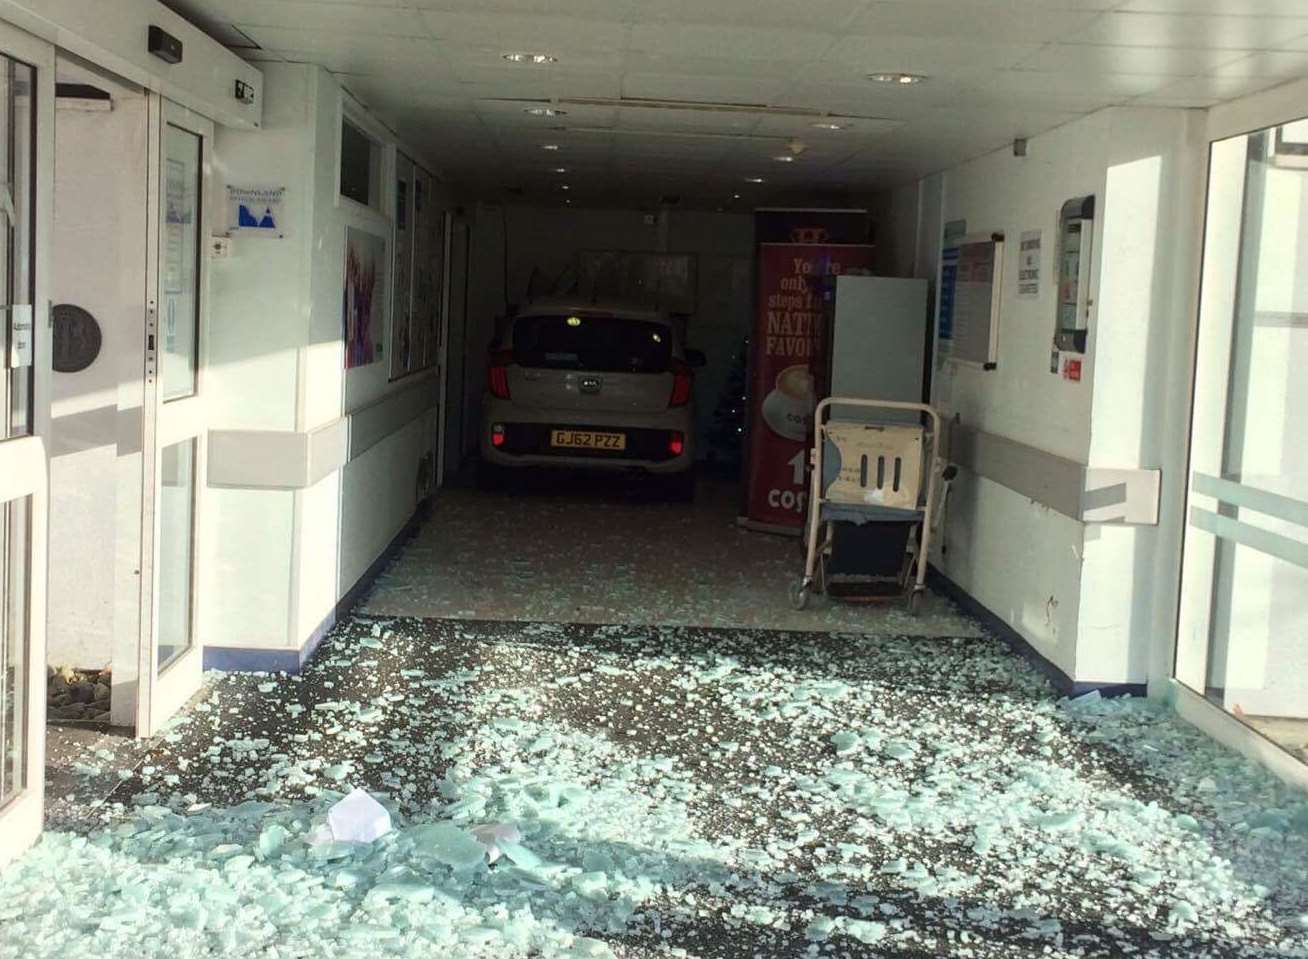 The car crashed into the hospital's oncology centre